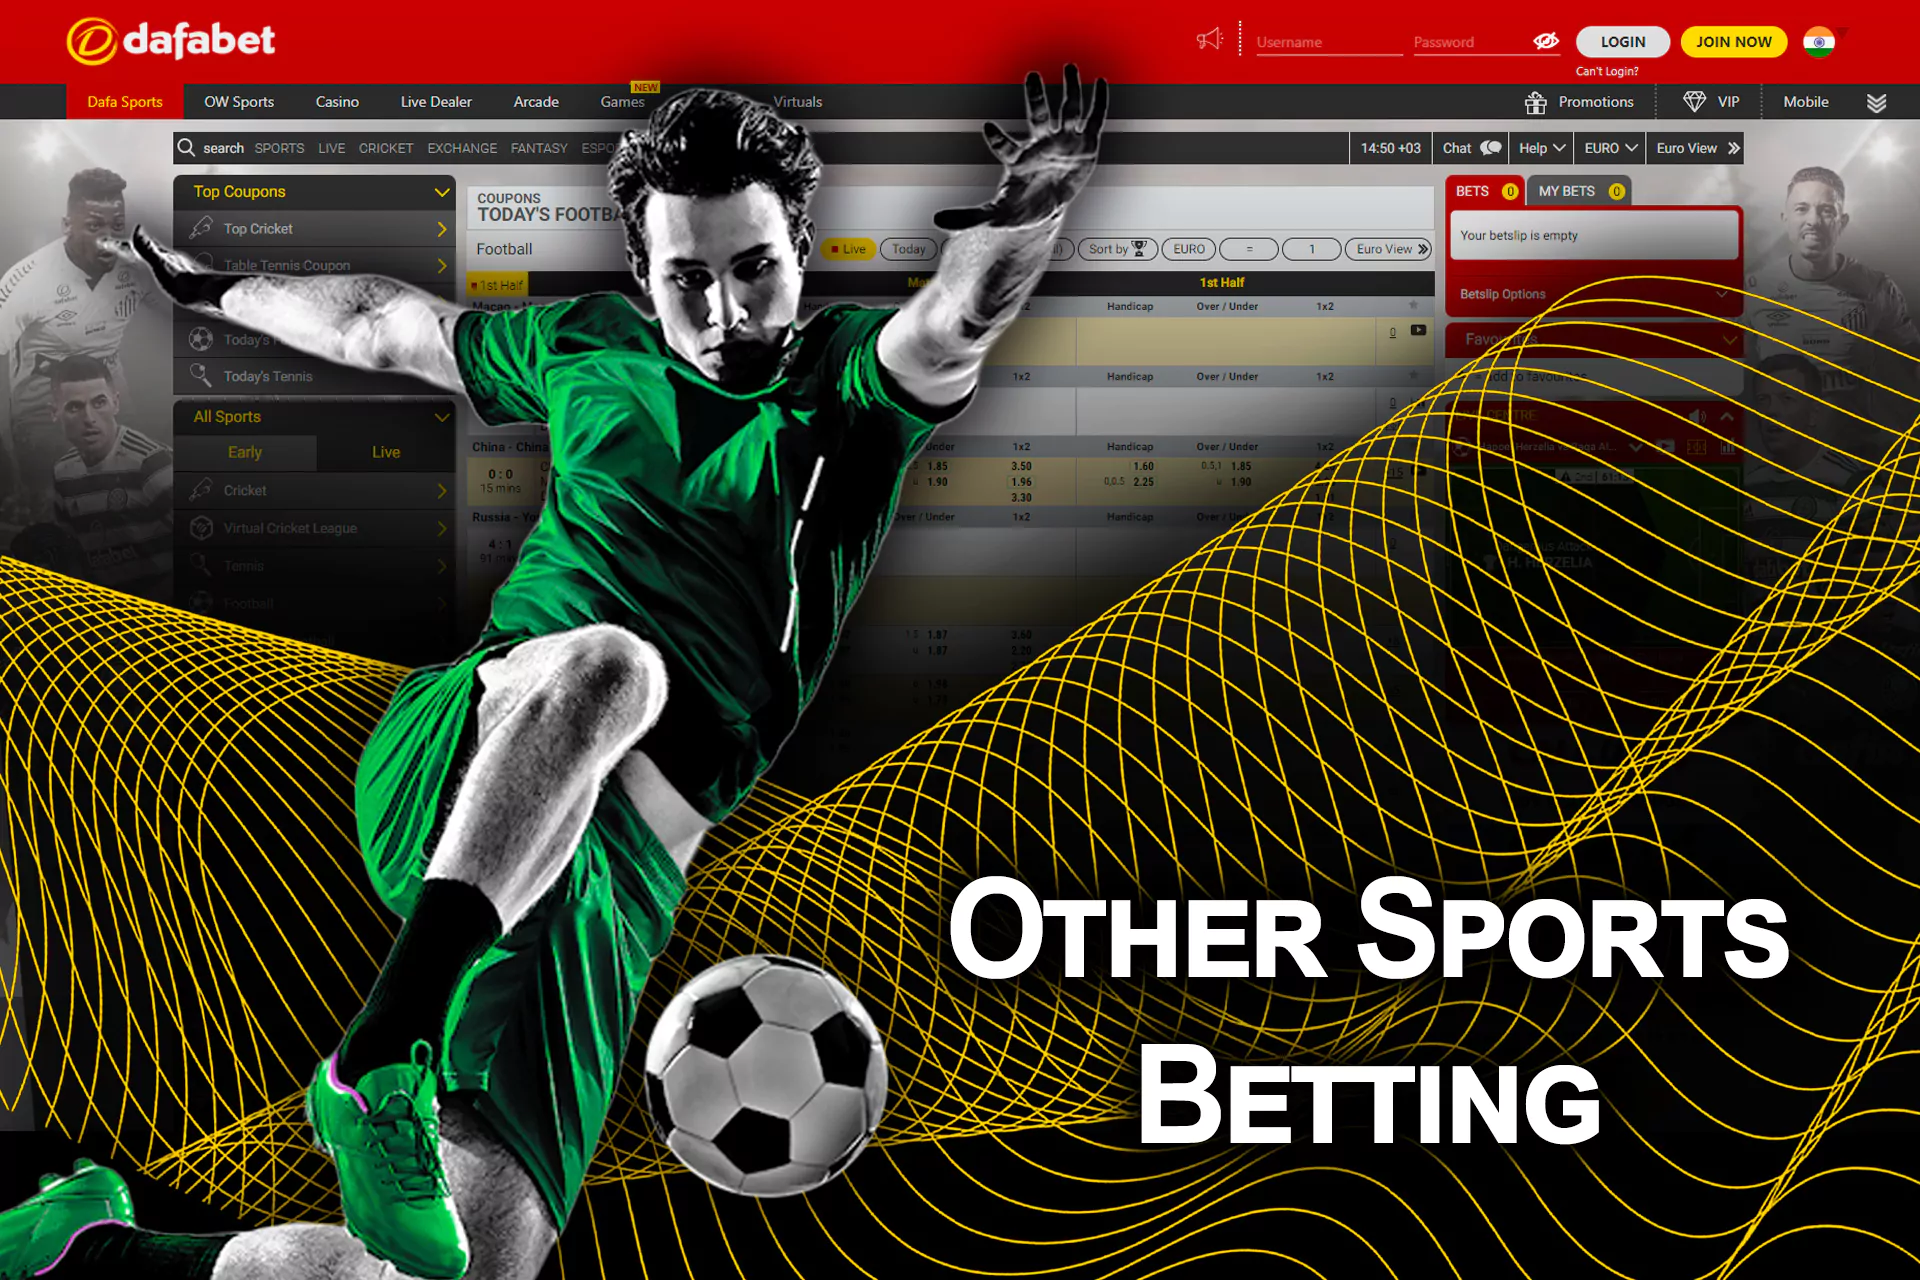 If you are also a fan of other kinds of sports, look at the available matches in the sportsbook.